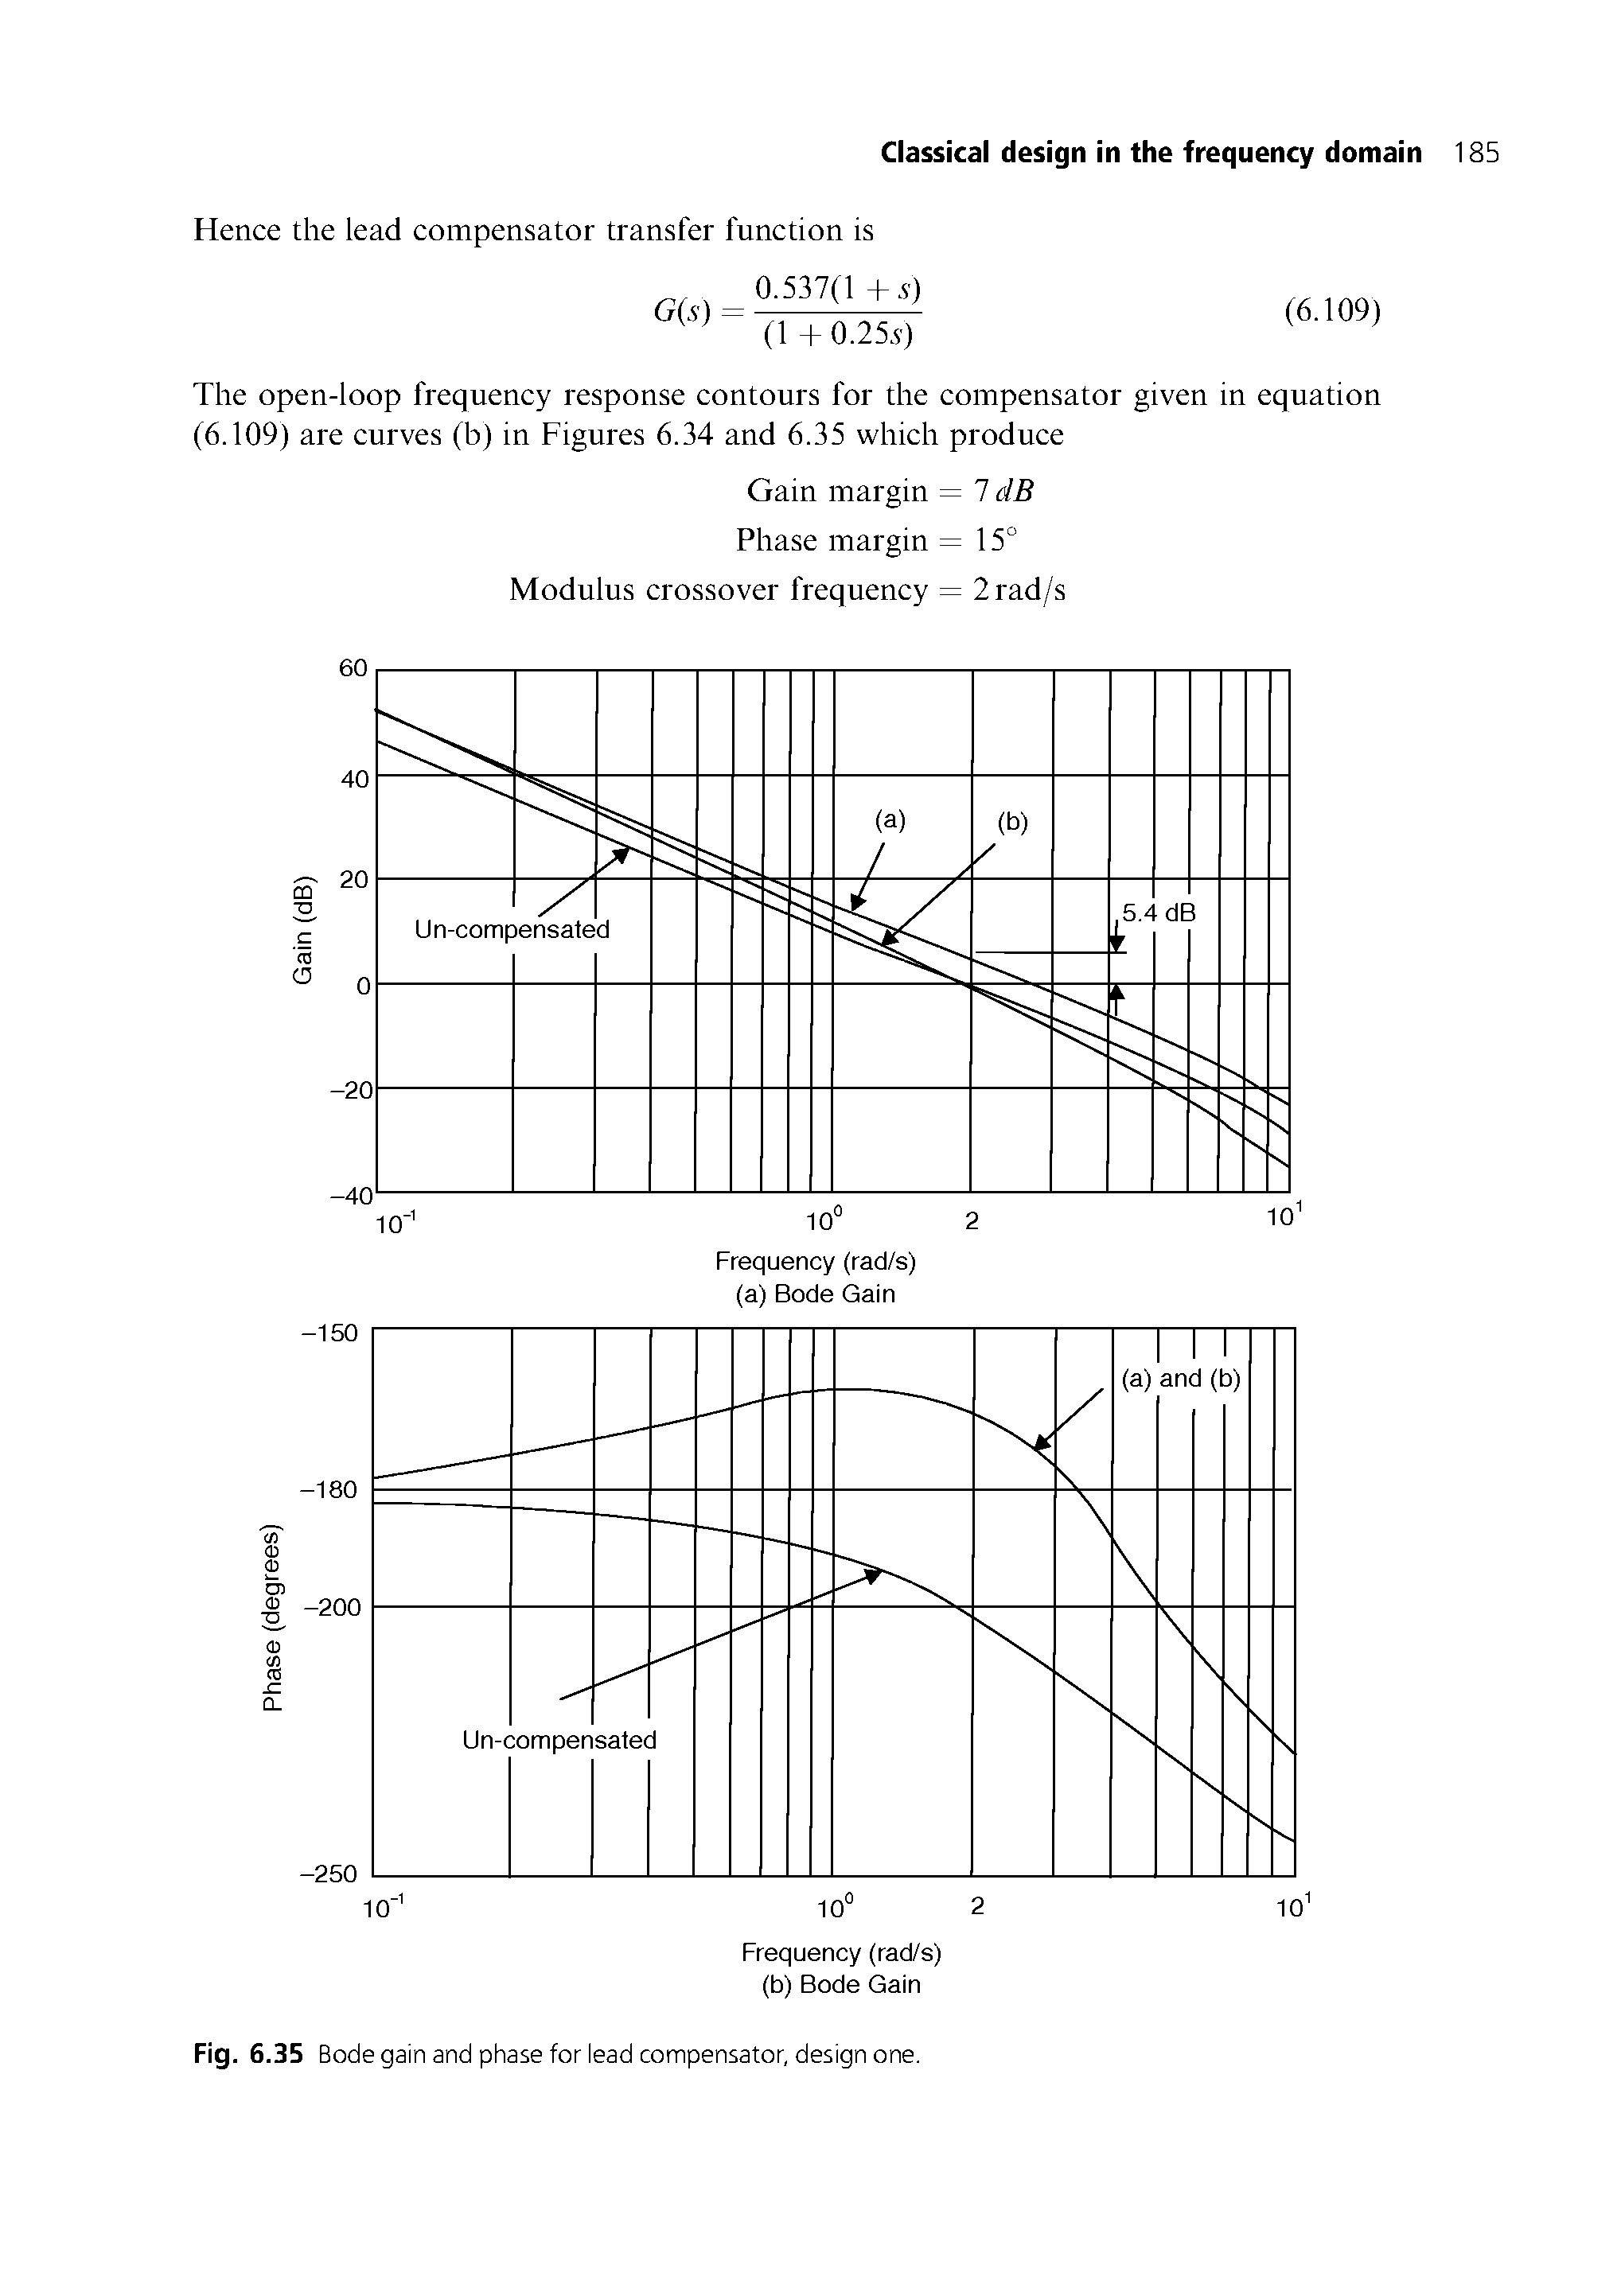 Fig. 6.35 Bode gain and phase for lead compensator, design one.